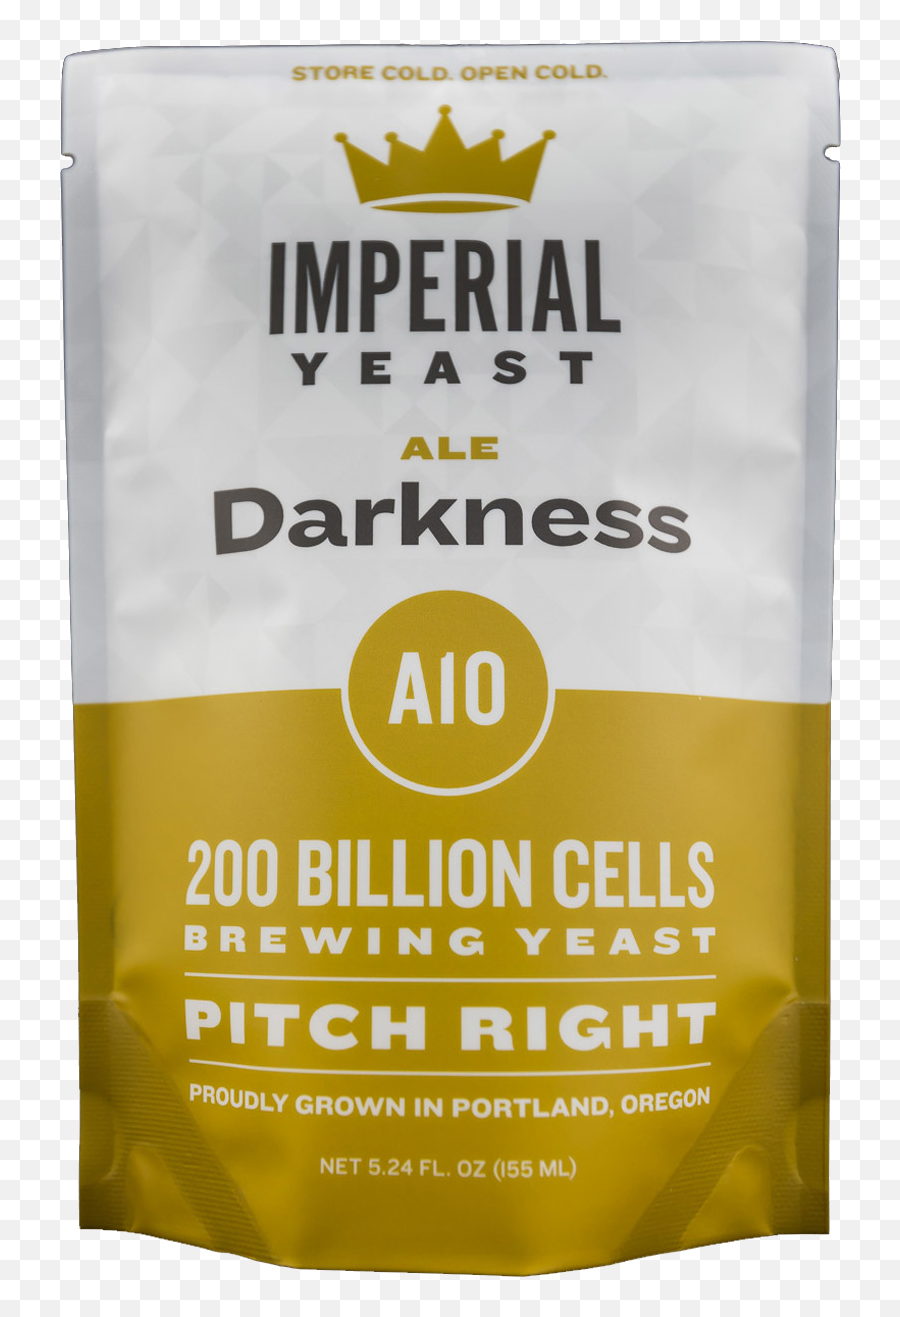 Darkness - A10 Ale Yeast Imperial Yeast Restaurant Png,Darkness Png